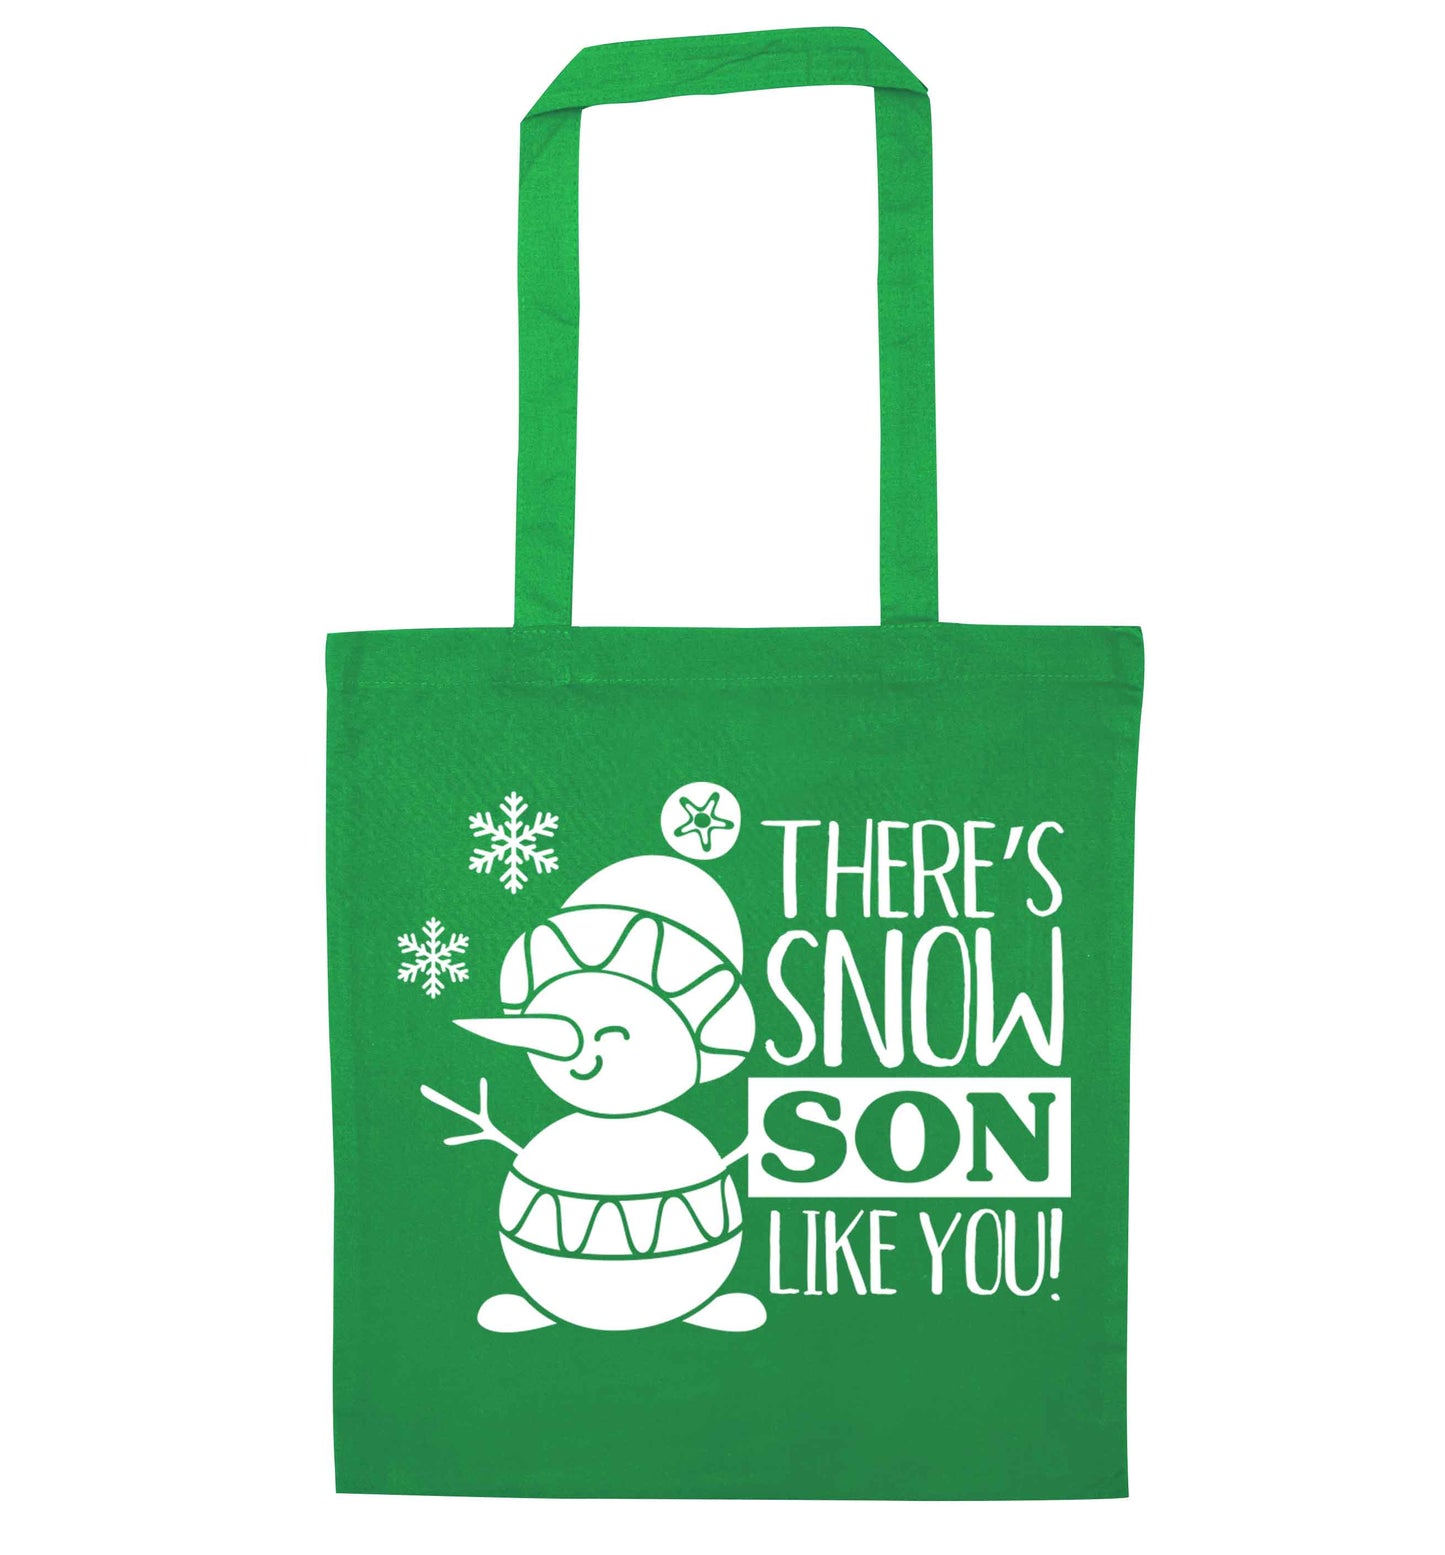 There's snow son like you green tote bag